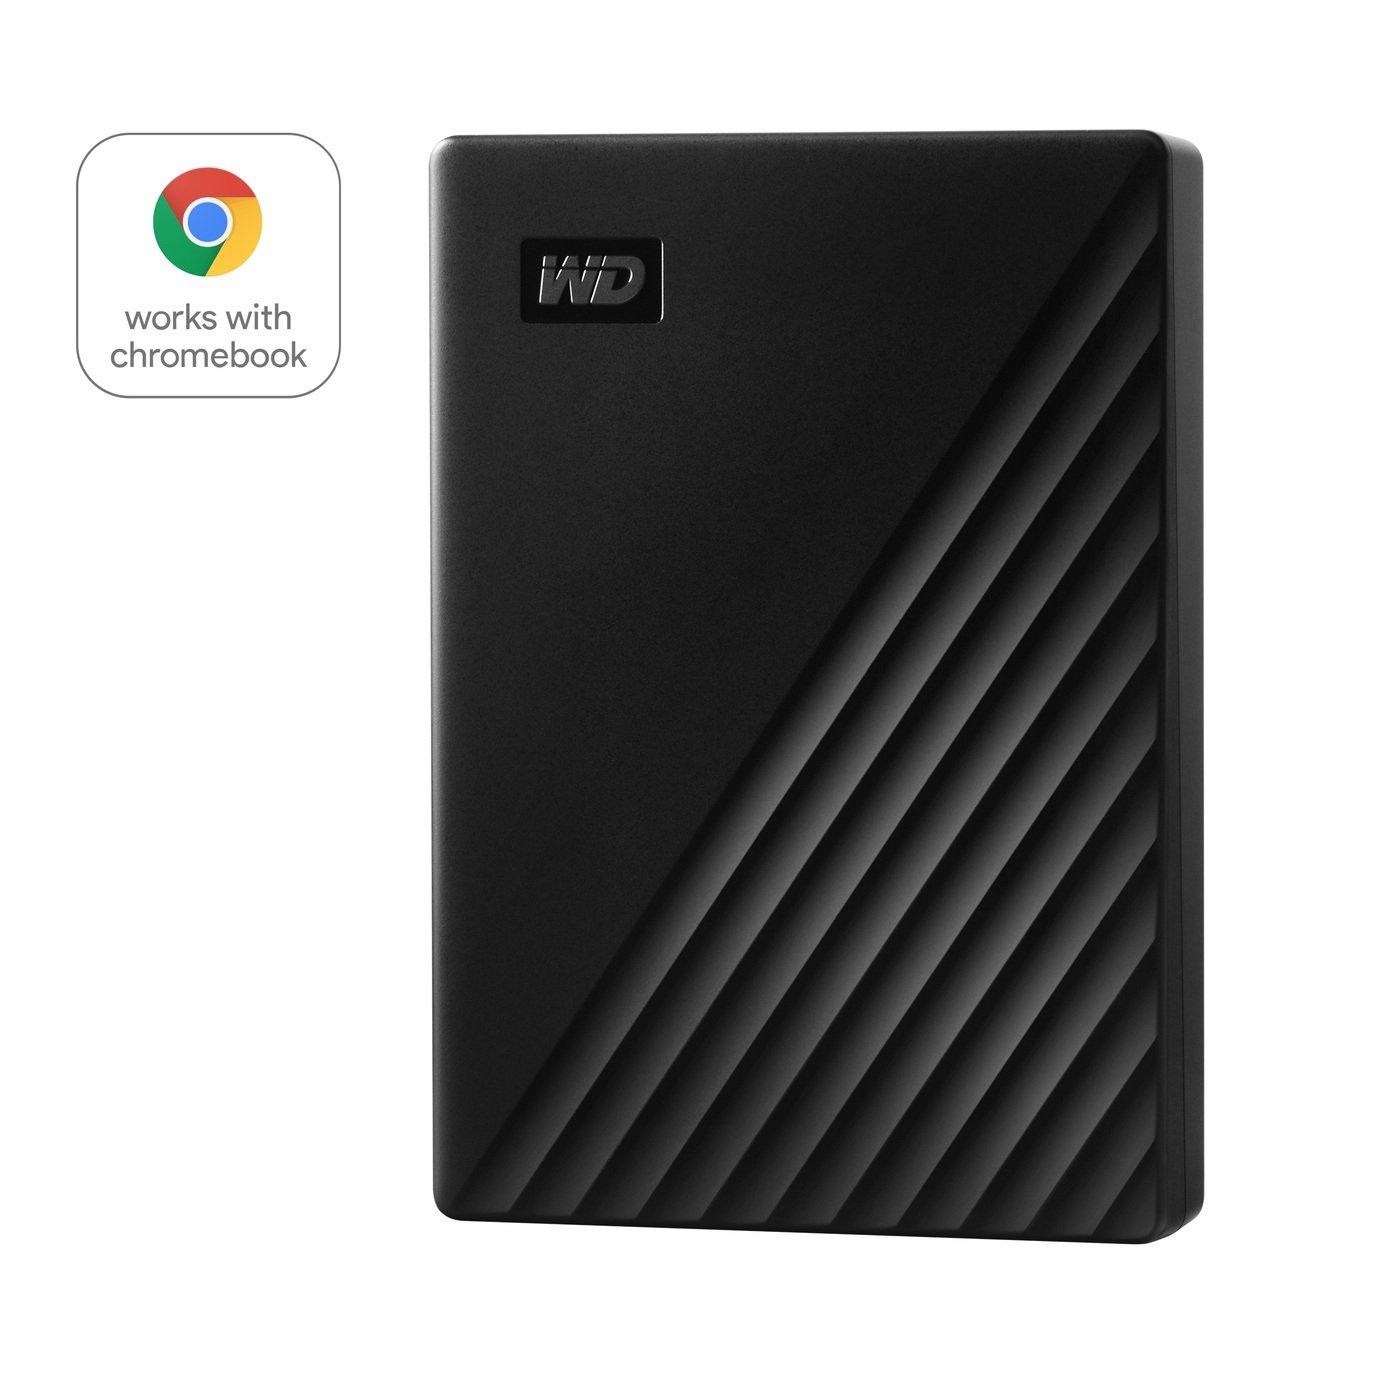 WD Passport 2TB Portable Hard Drive Review